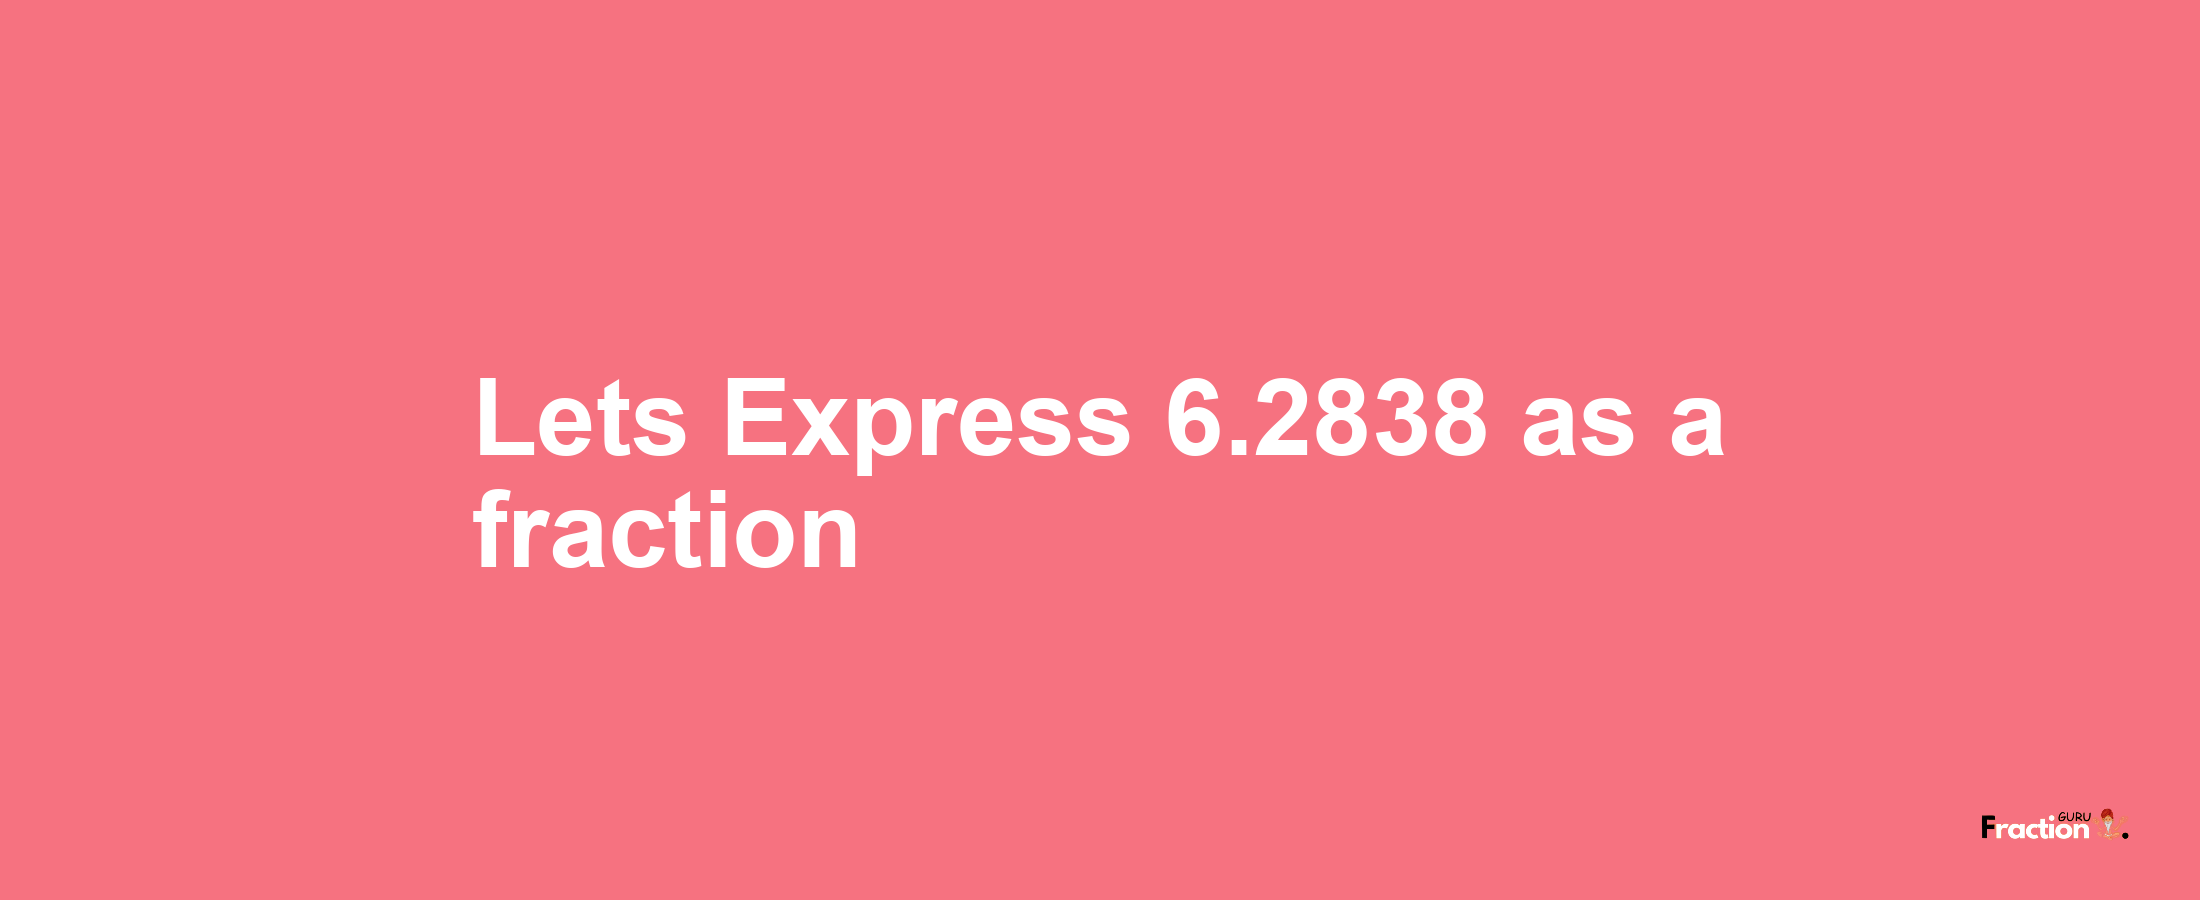 Lets Express 6.2838 as afraction